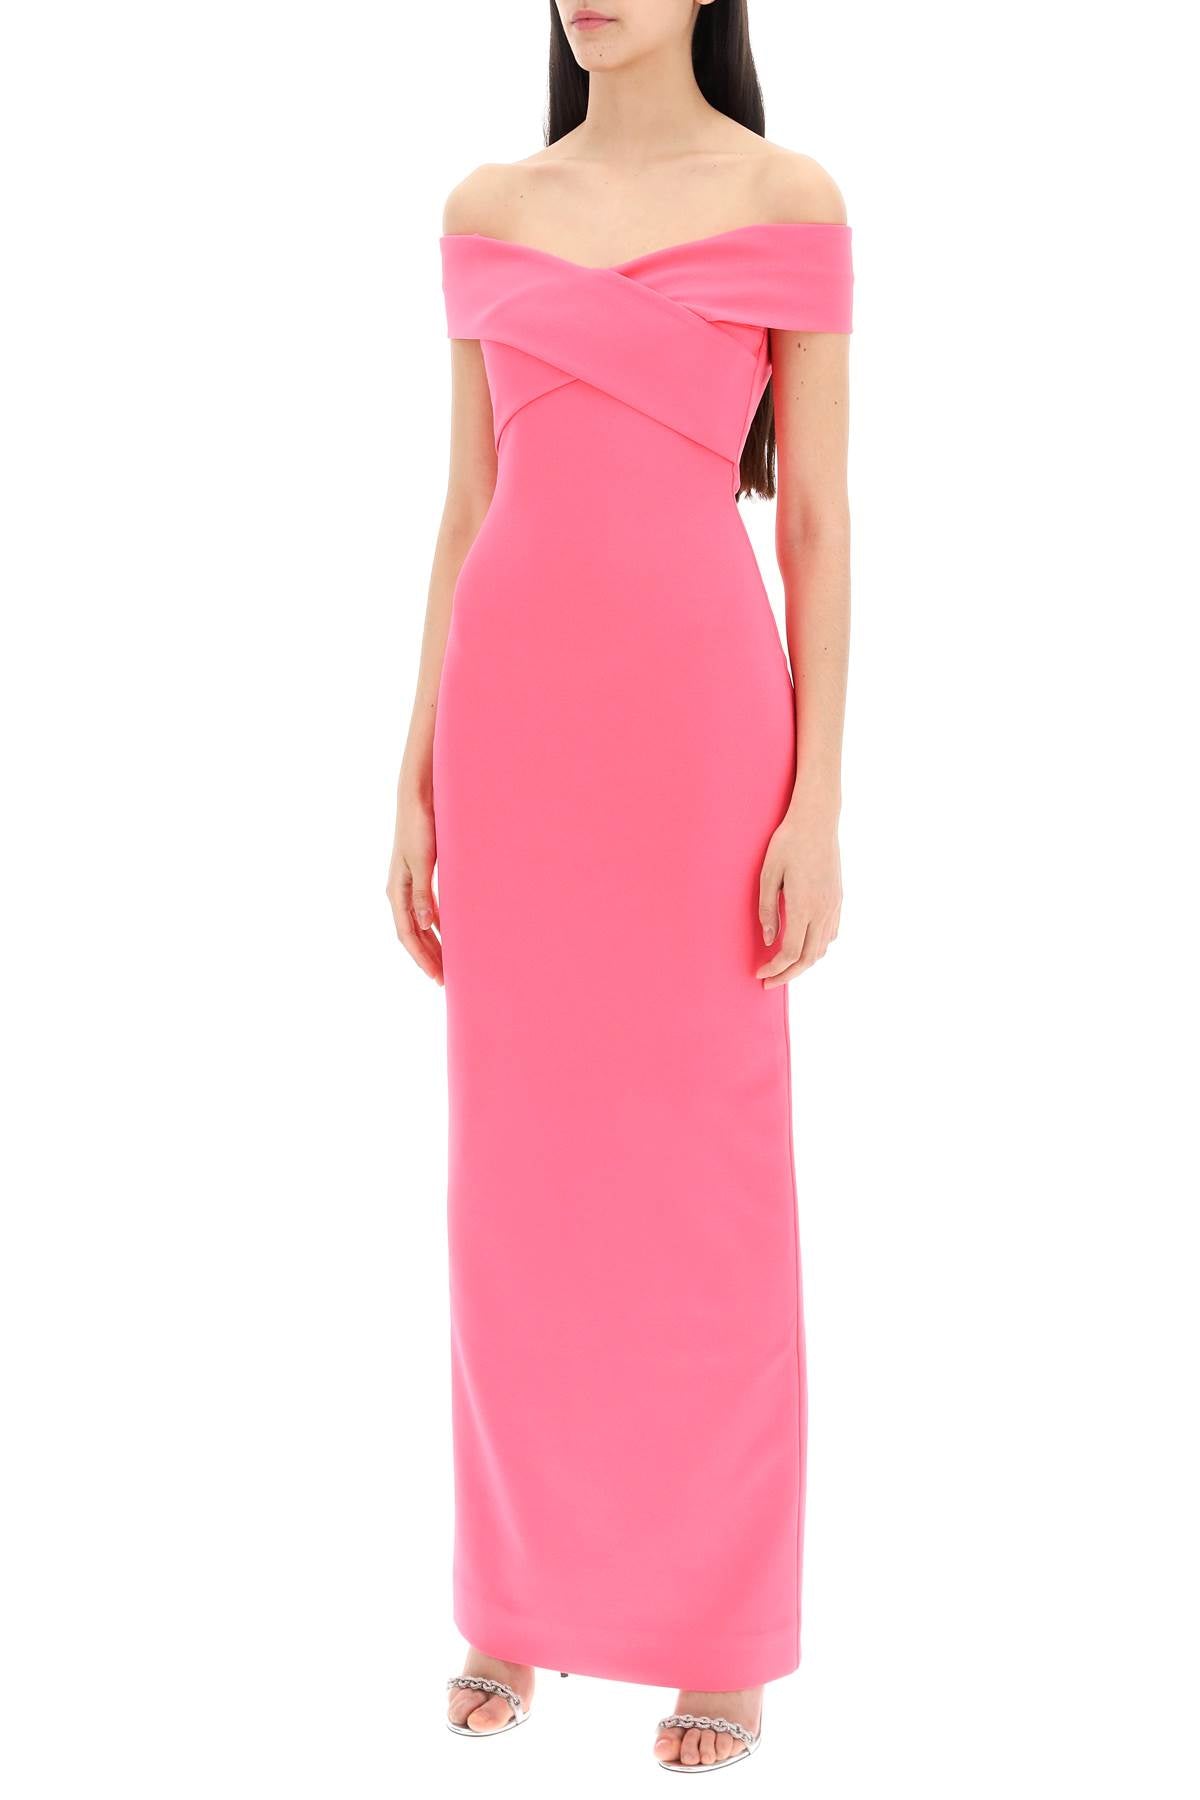 Solace london maxi dress ines with-3